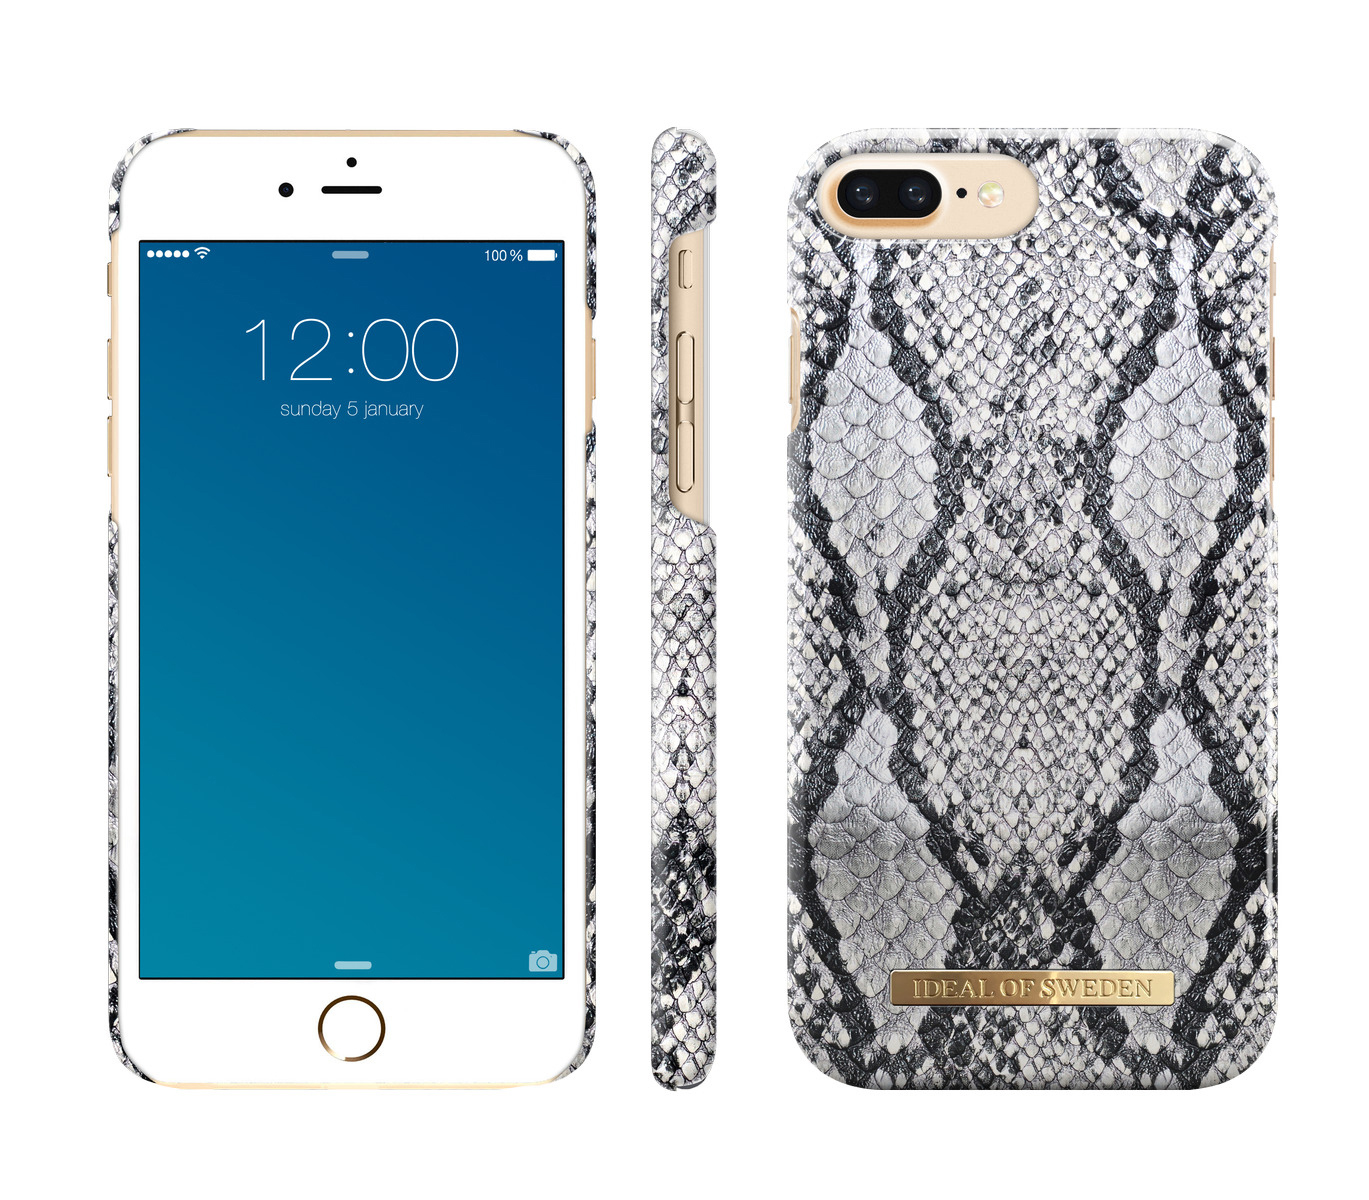 IDEAL OF iPhone 8, Backcover, Python 6, Fashion, iPhone SWEDEN 7, iPhone Apple